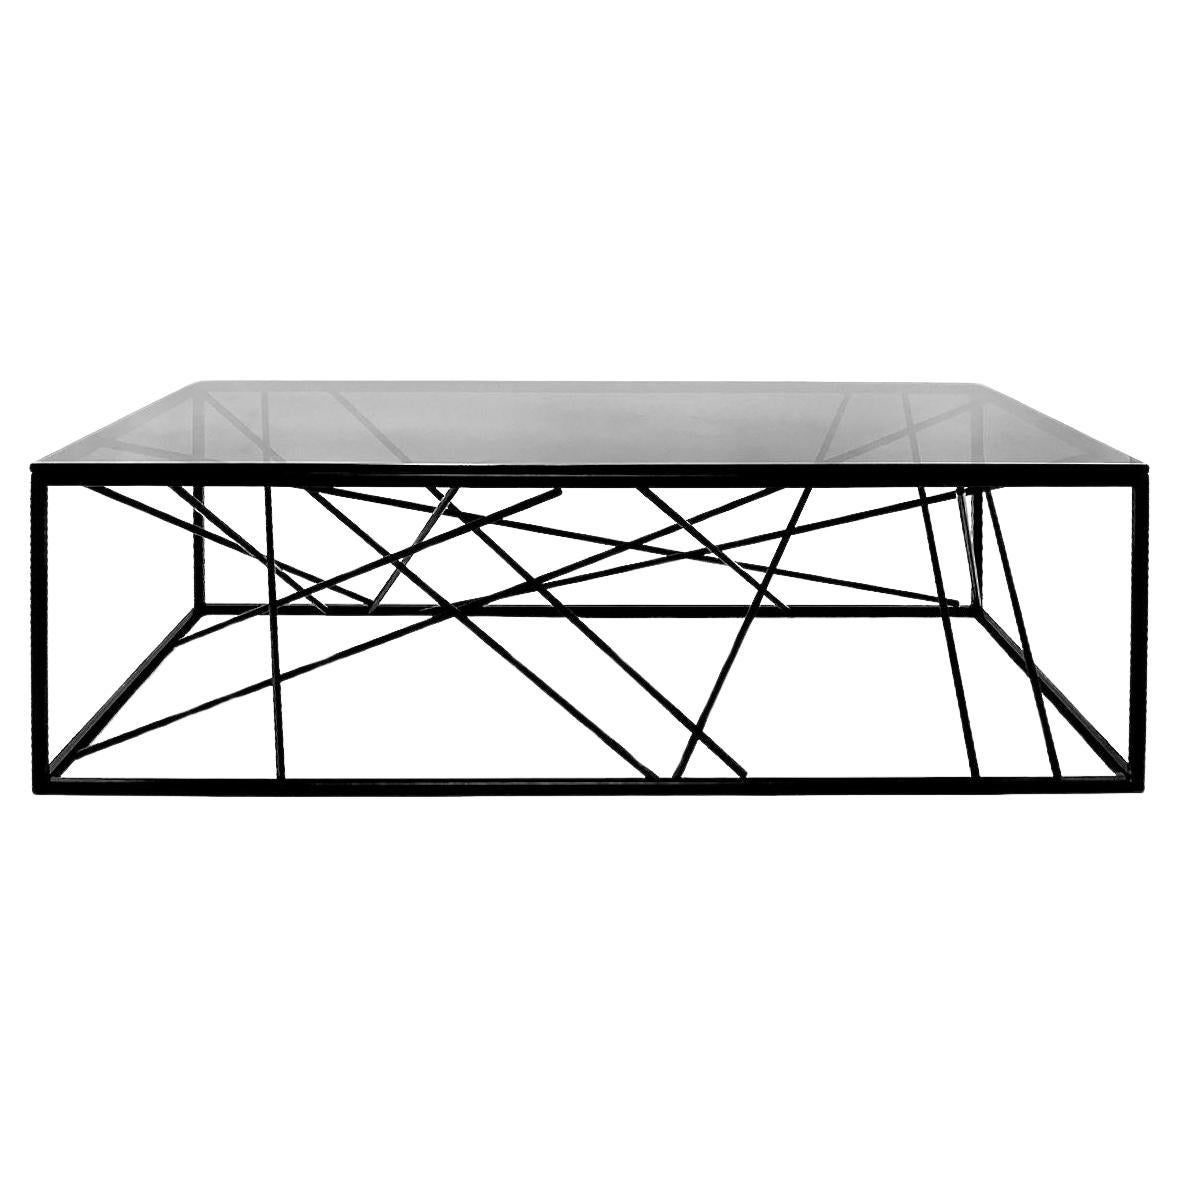 Nest Coffee Table by Morgan Clayhall, sculptural, steel, glass For Sale